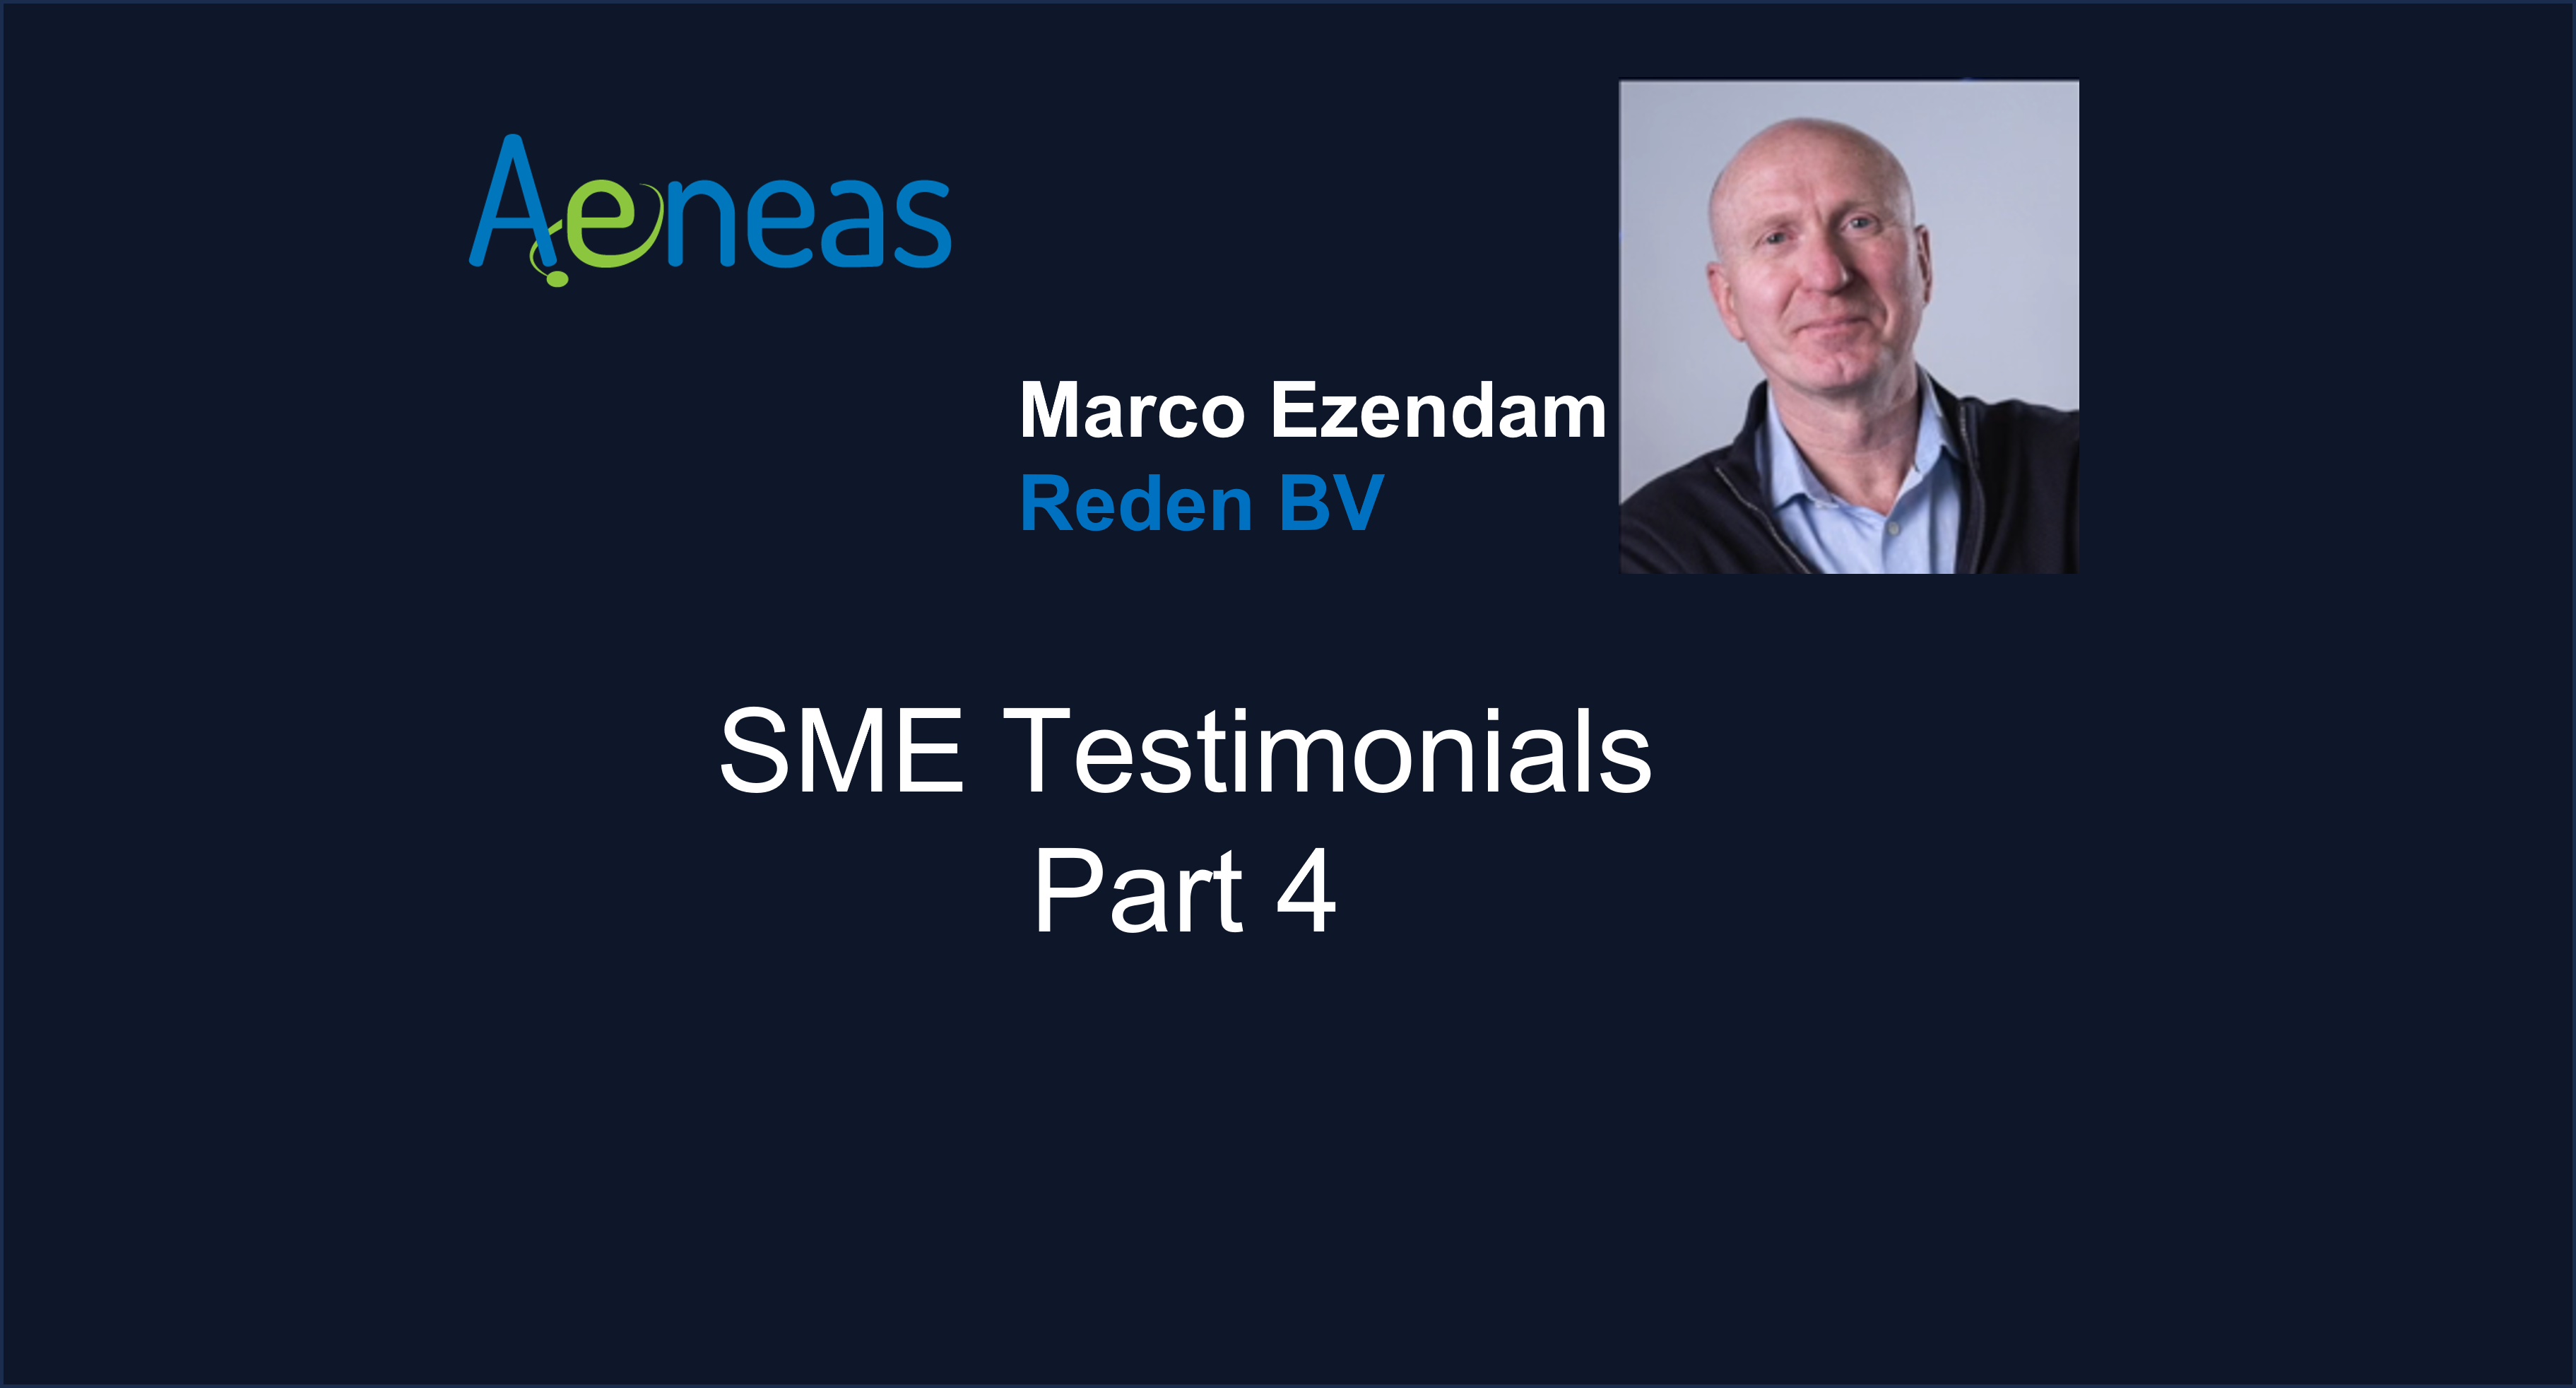 New video of SME testimonial series of interviews with AENEAS members is now available – Marco Ezendam from Reden BV